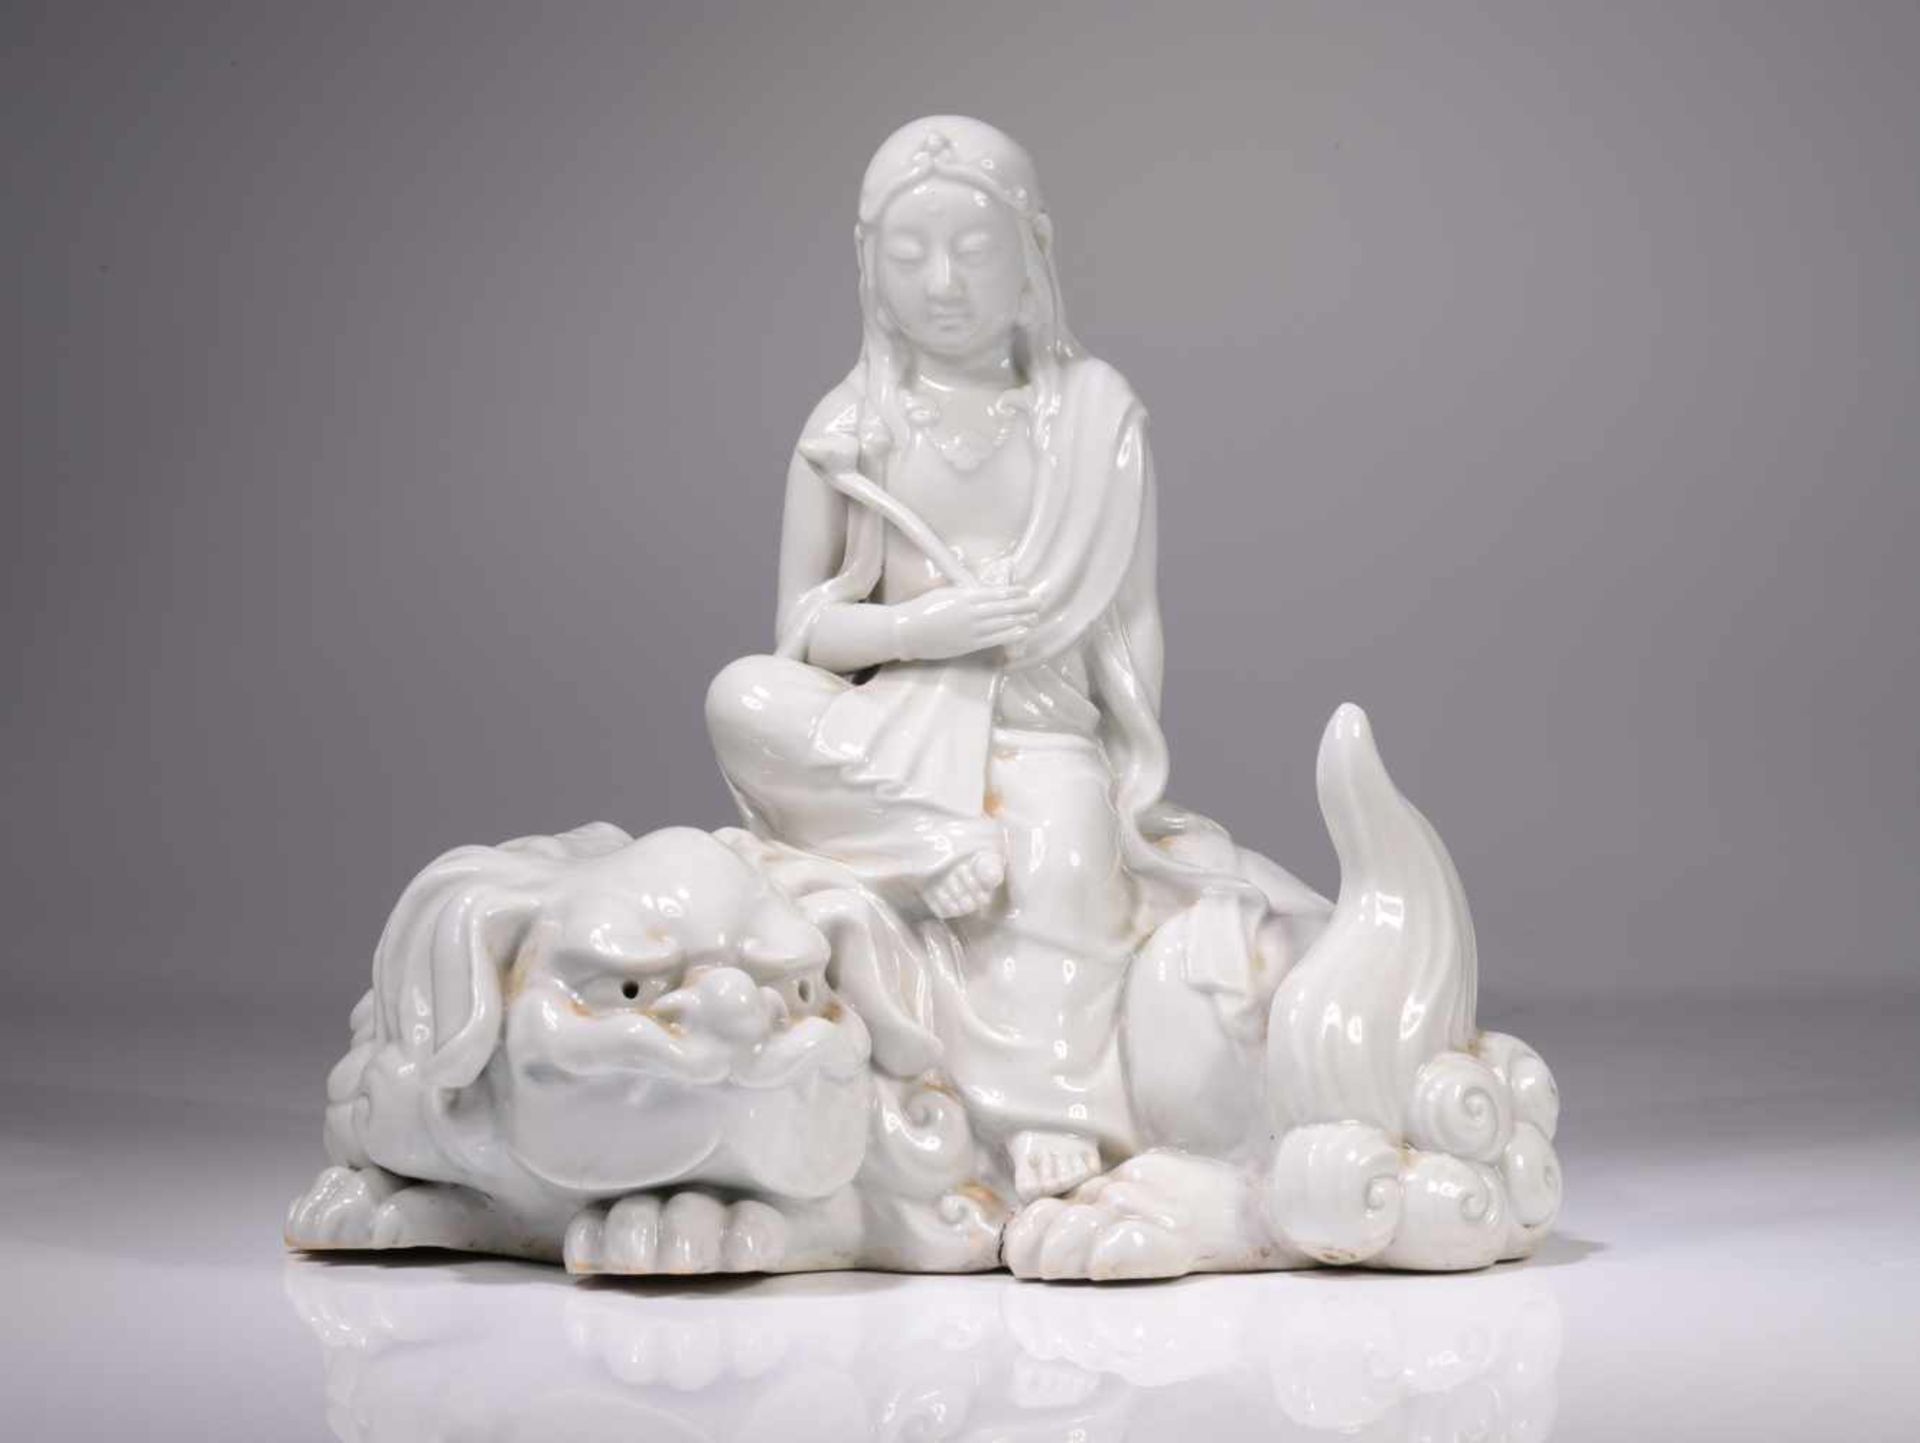 GUANYIN ON BUDDHIST LIONBlanc de chine,Japan or China, 19th centuryDimensions: Height 18 cm / Wide